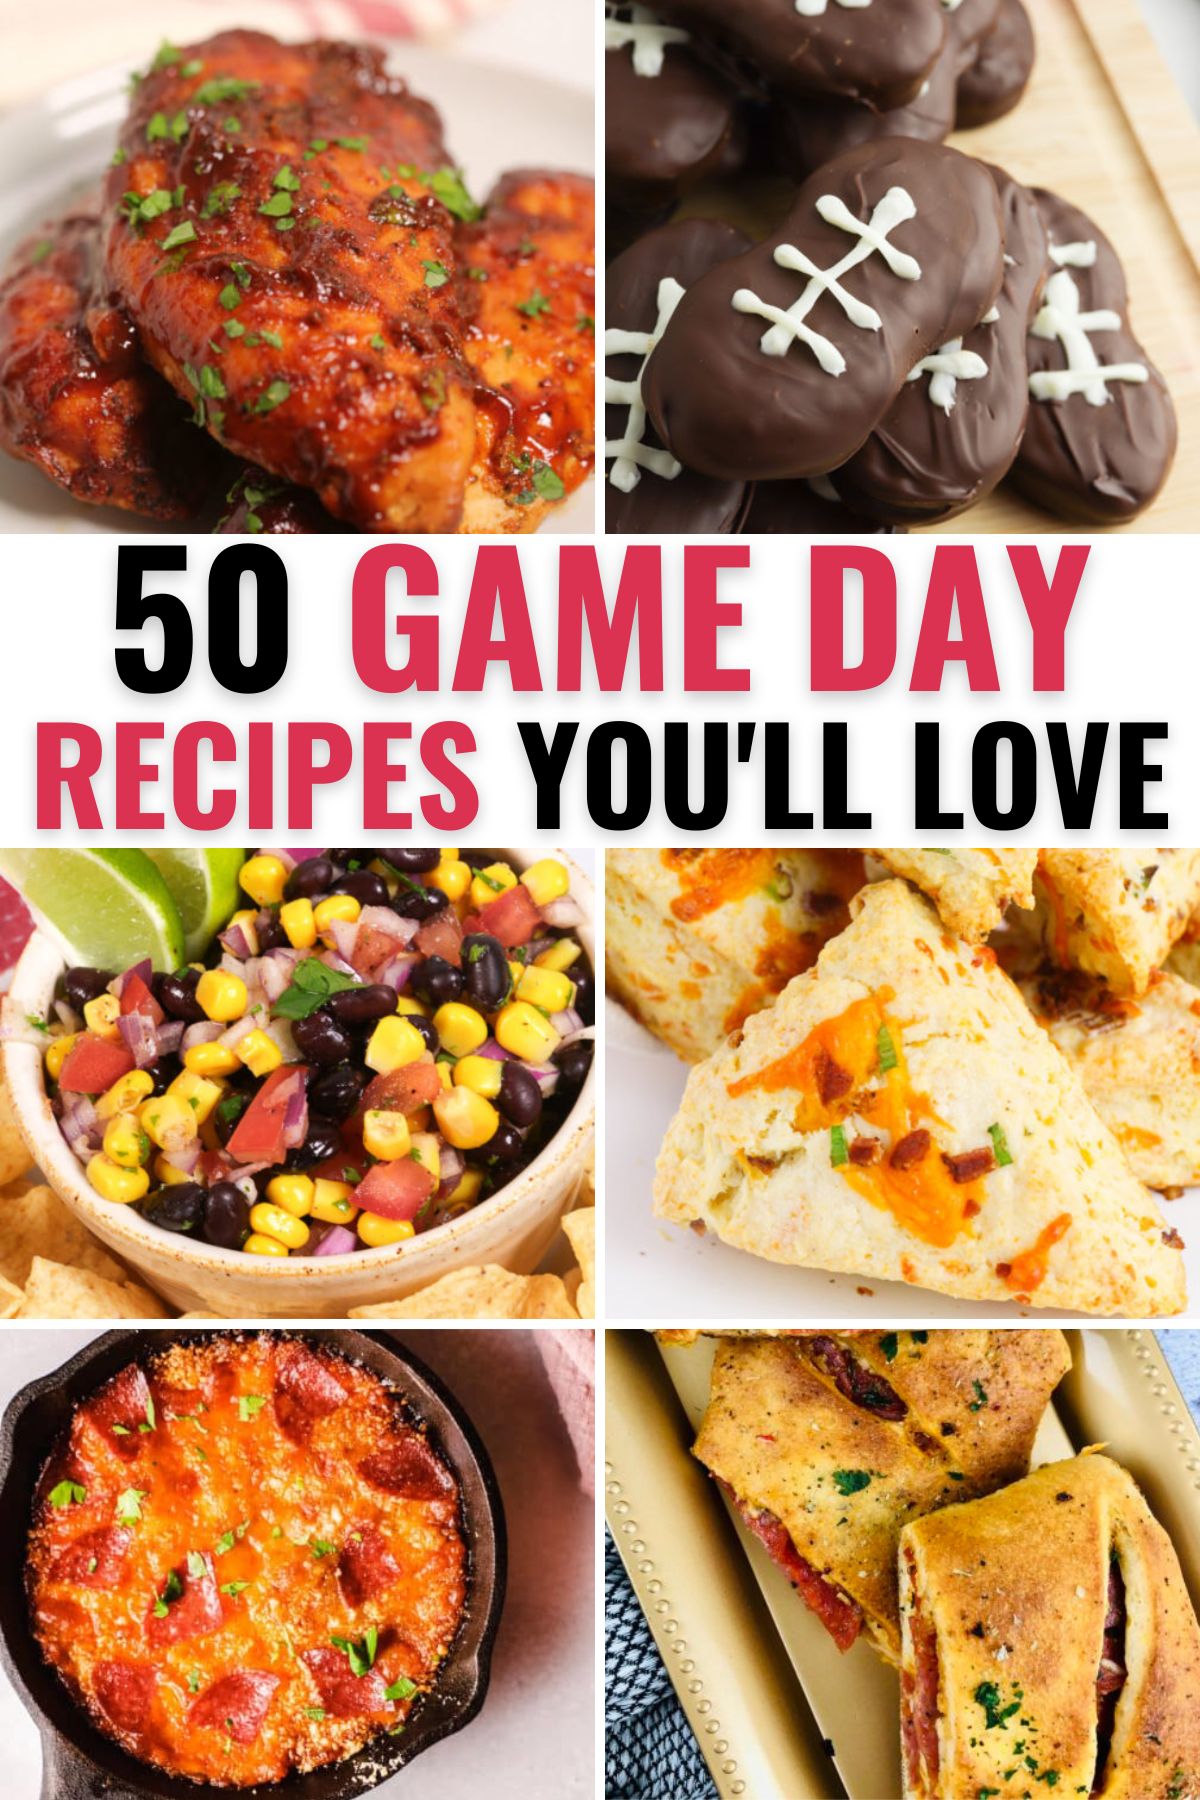 50 game days recipes from chicken, cookies, corn salsa, bacon cheddar scones, pepperoni dip and Italian stromboli 